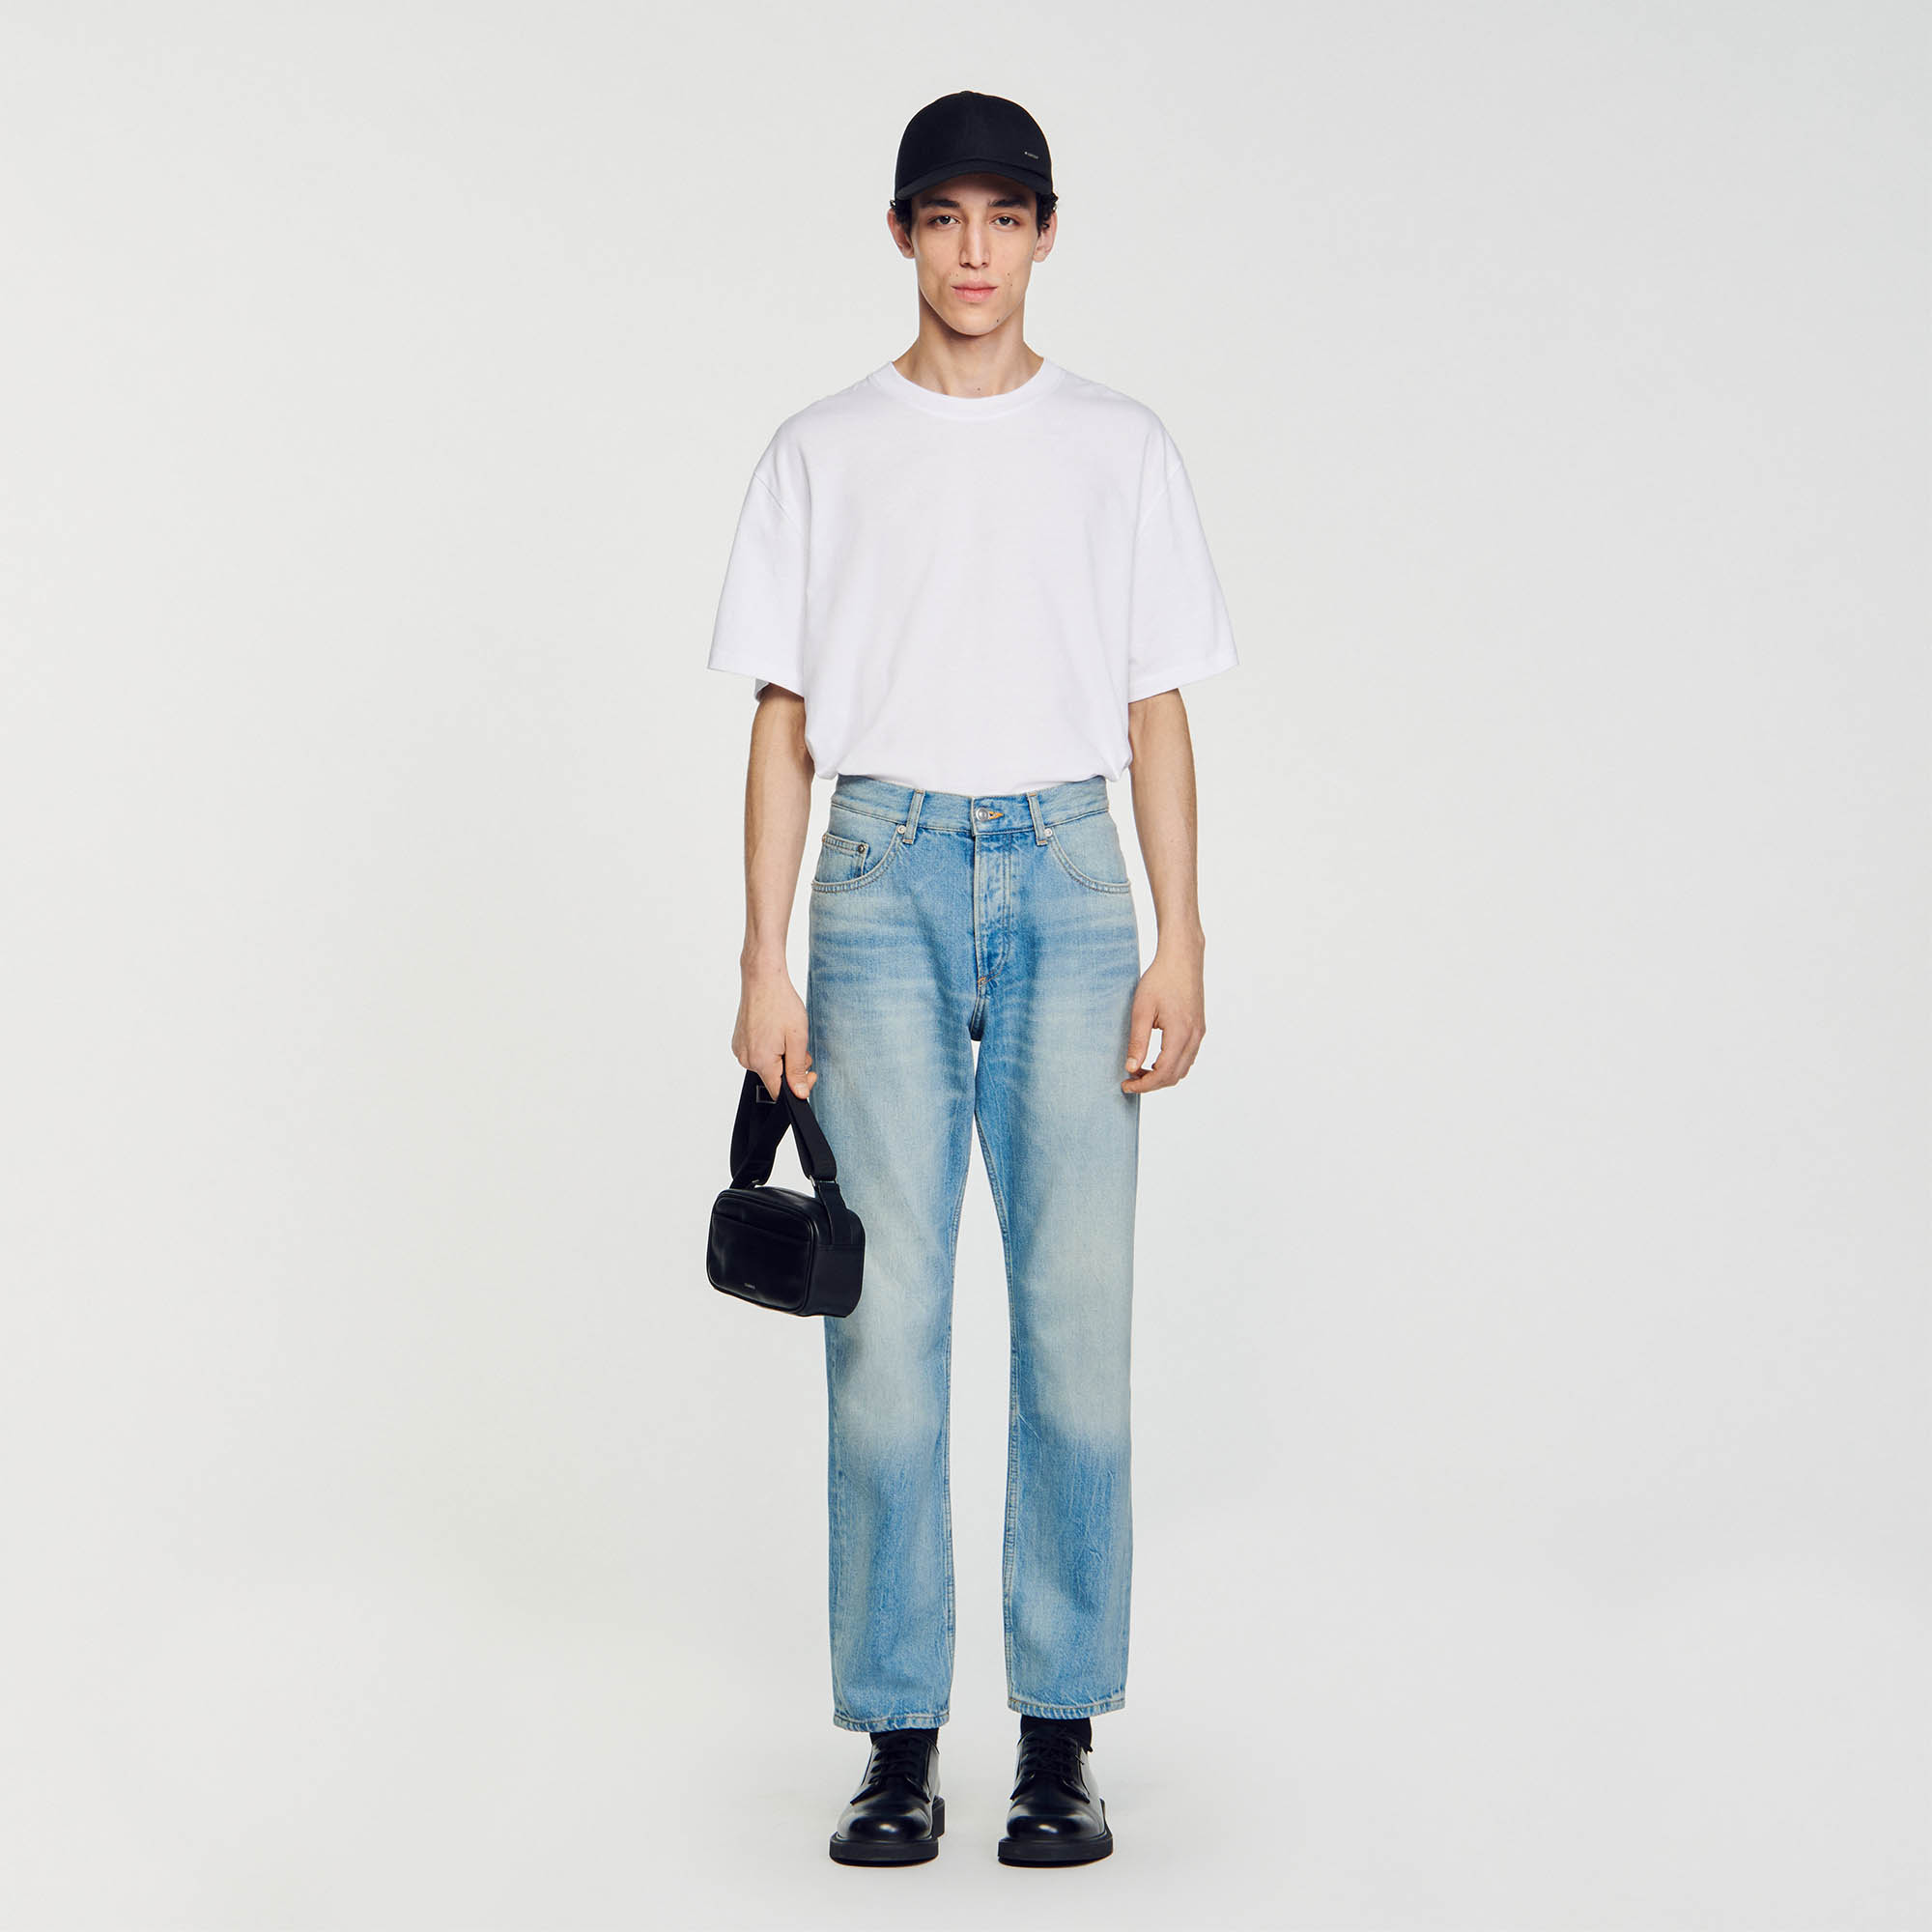 Sandro cotton Pocket lining: Faded denim five-pocket jeans with belt loops and jacron on back